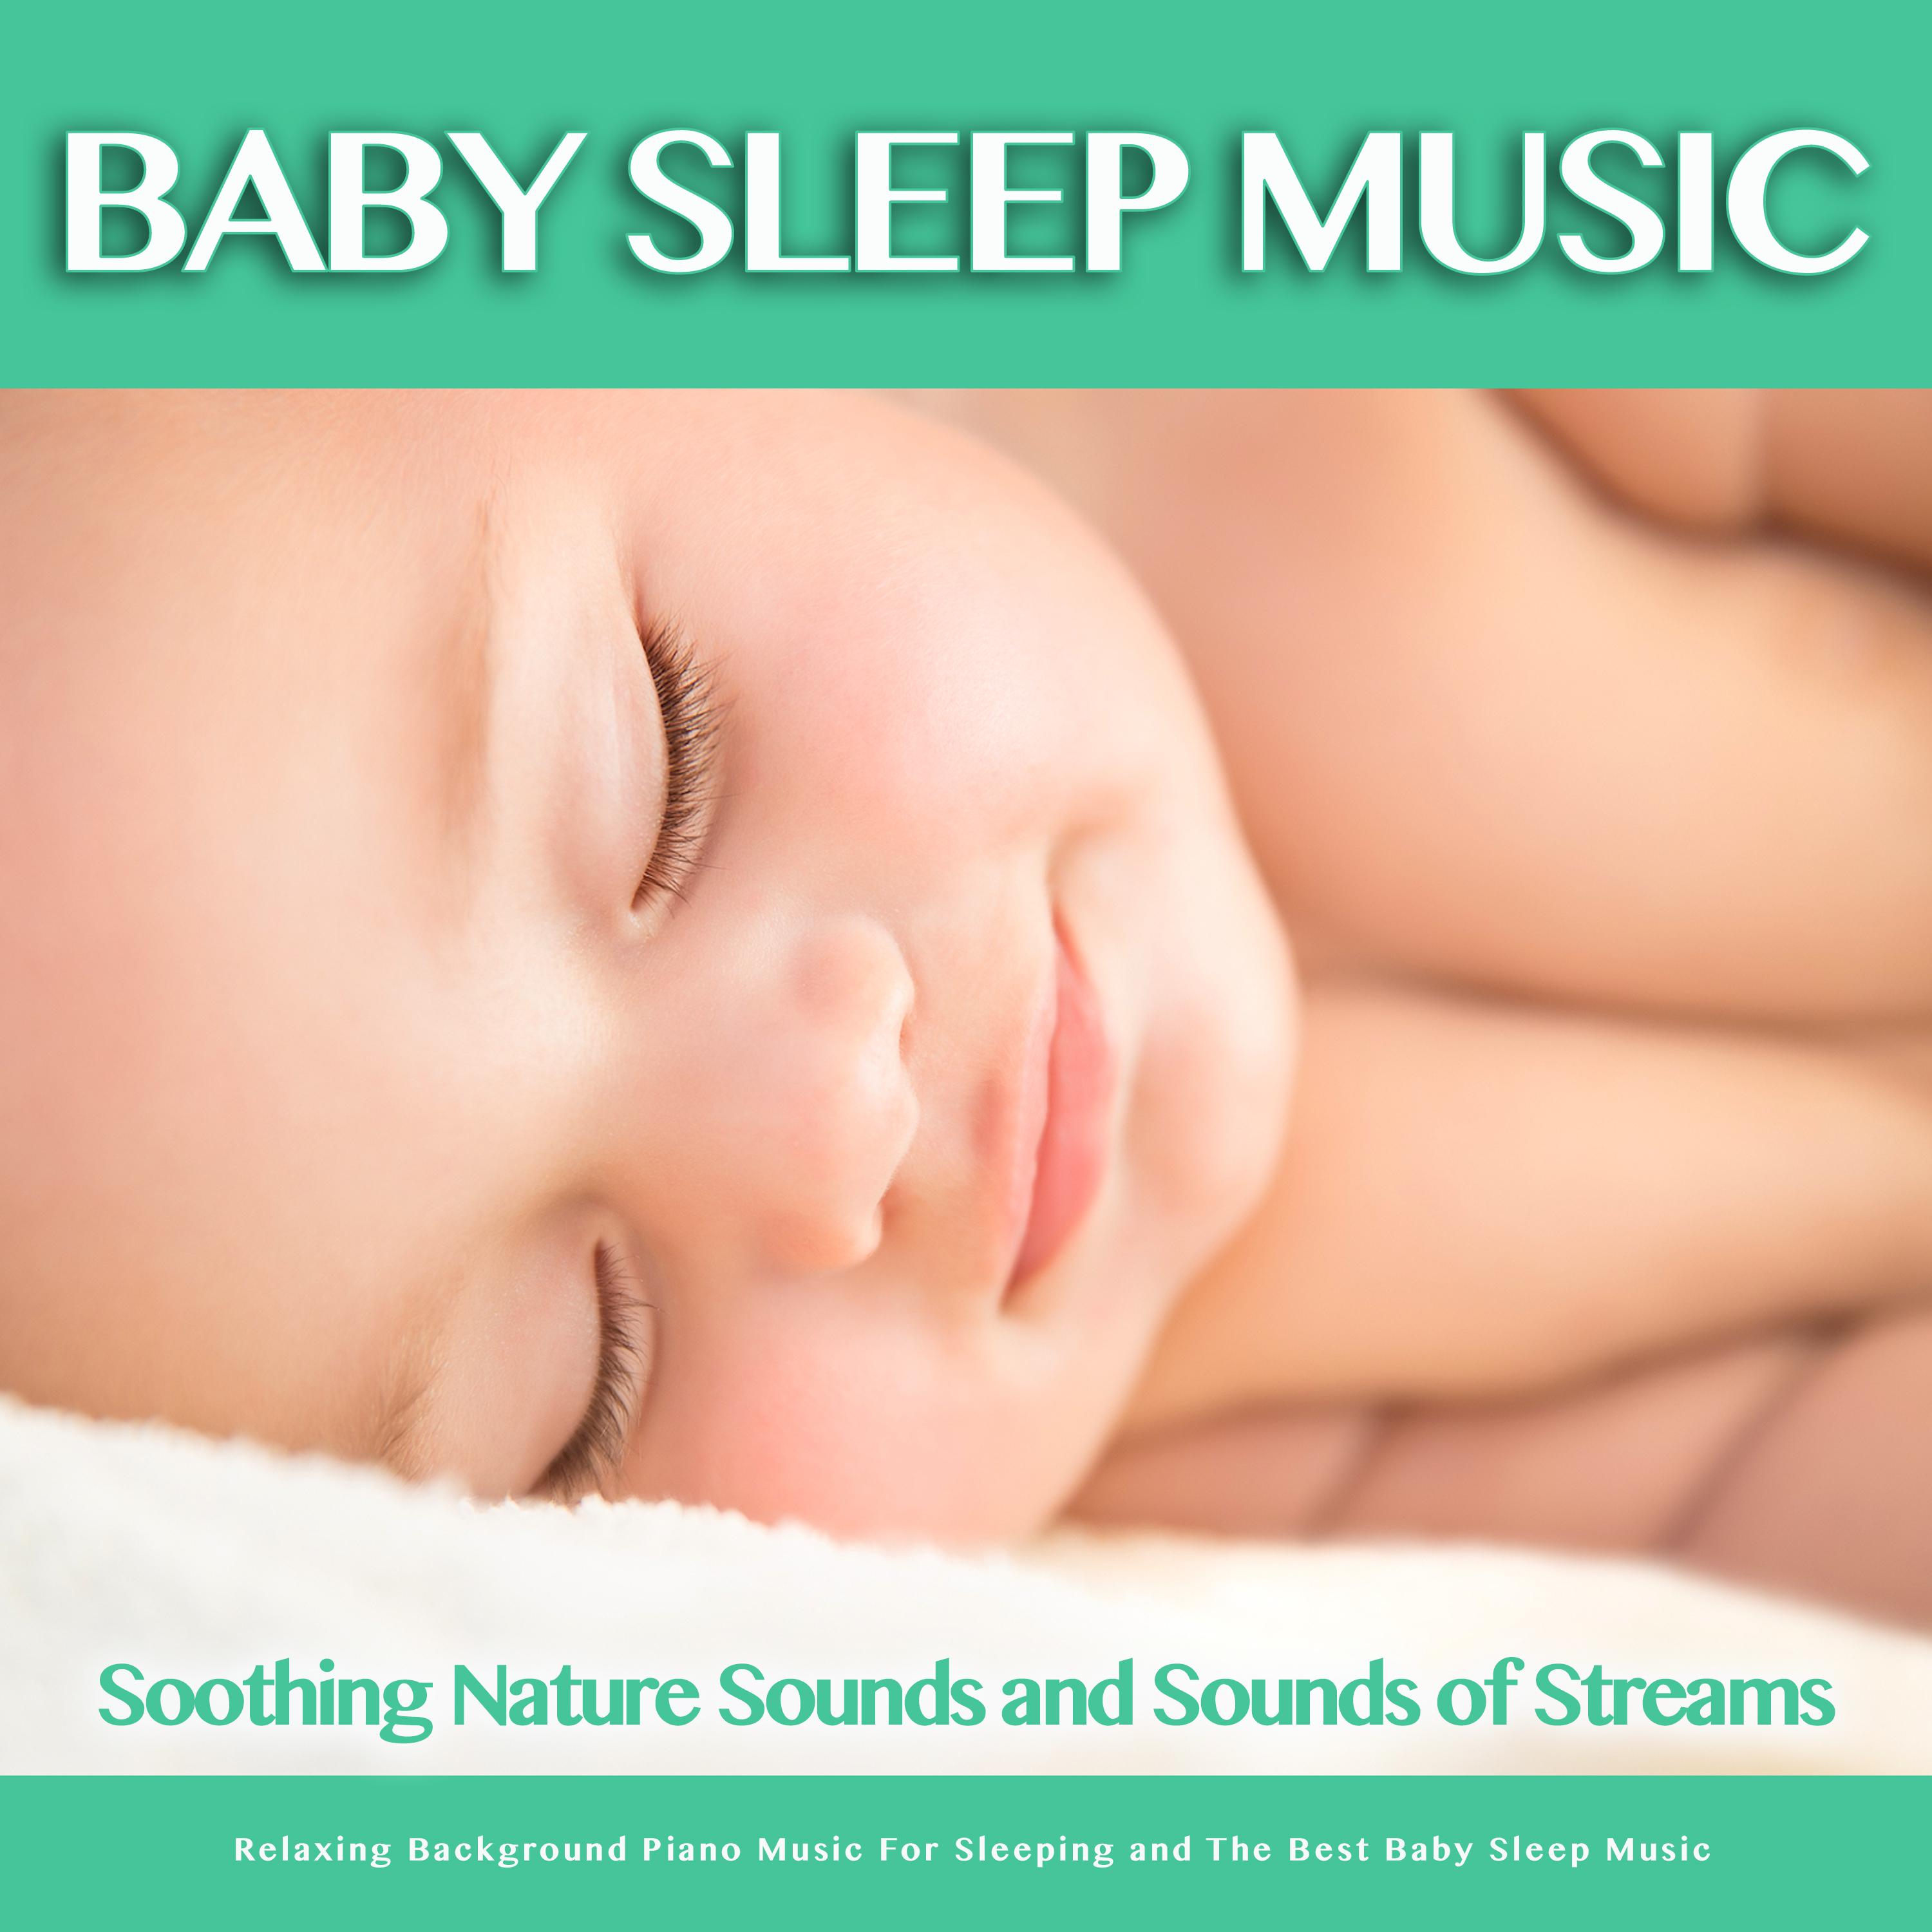 Baby Lullaby and Sounds of Streams